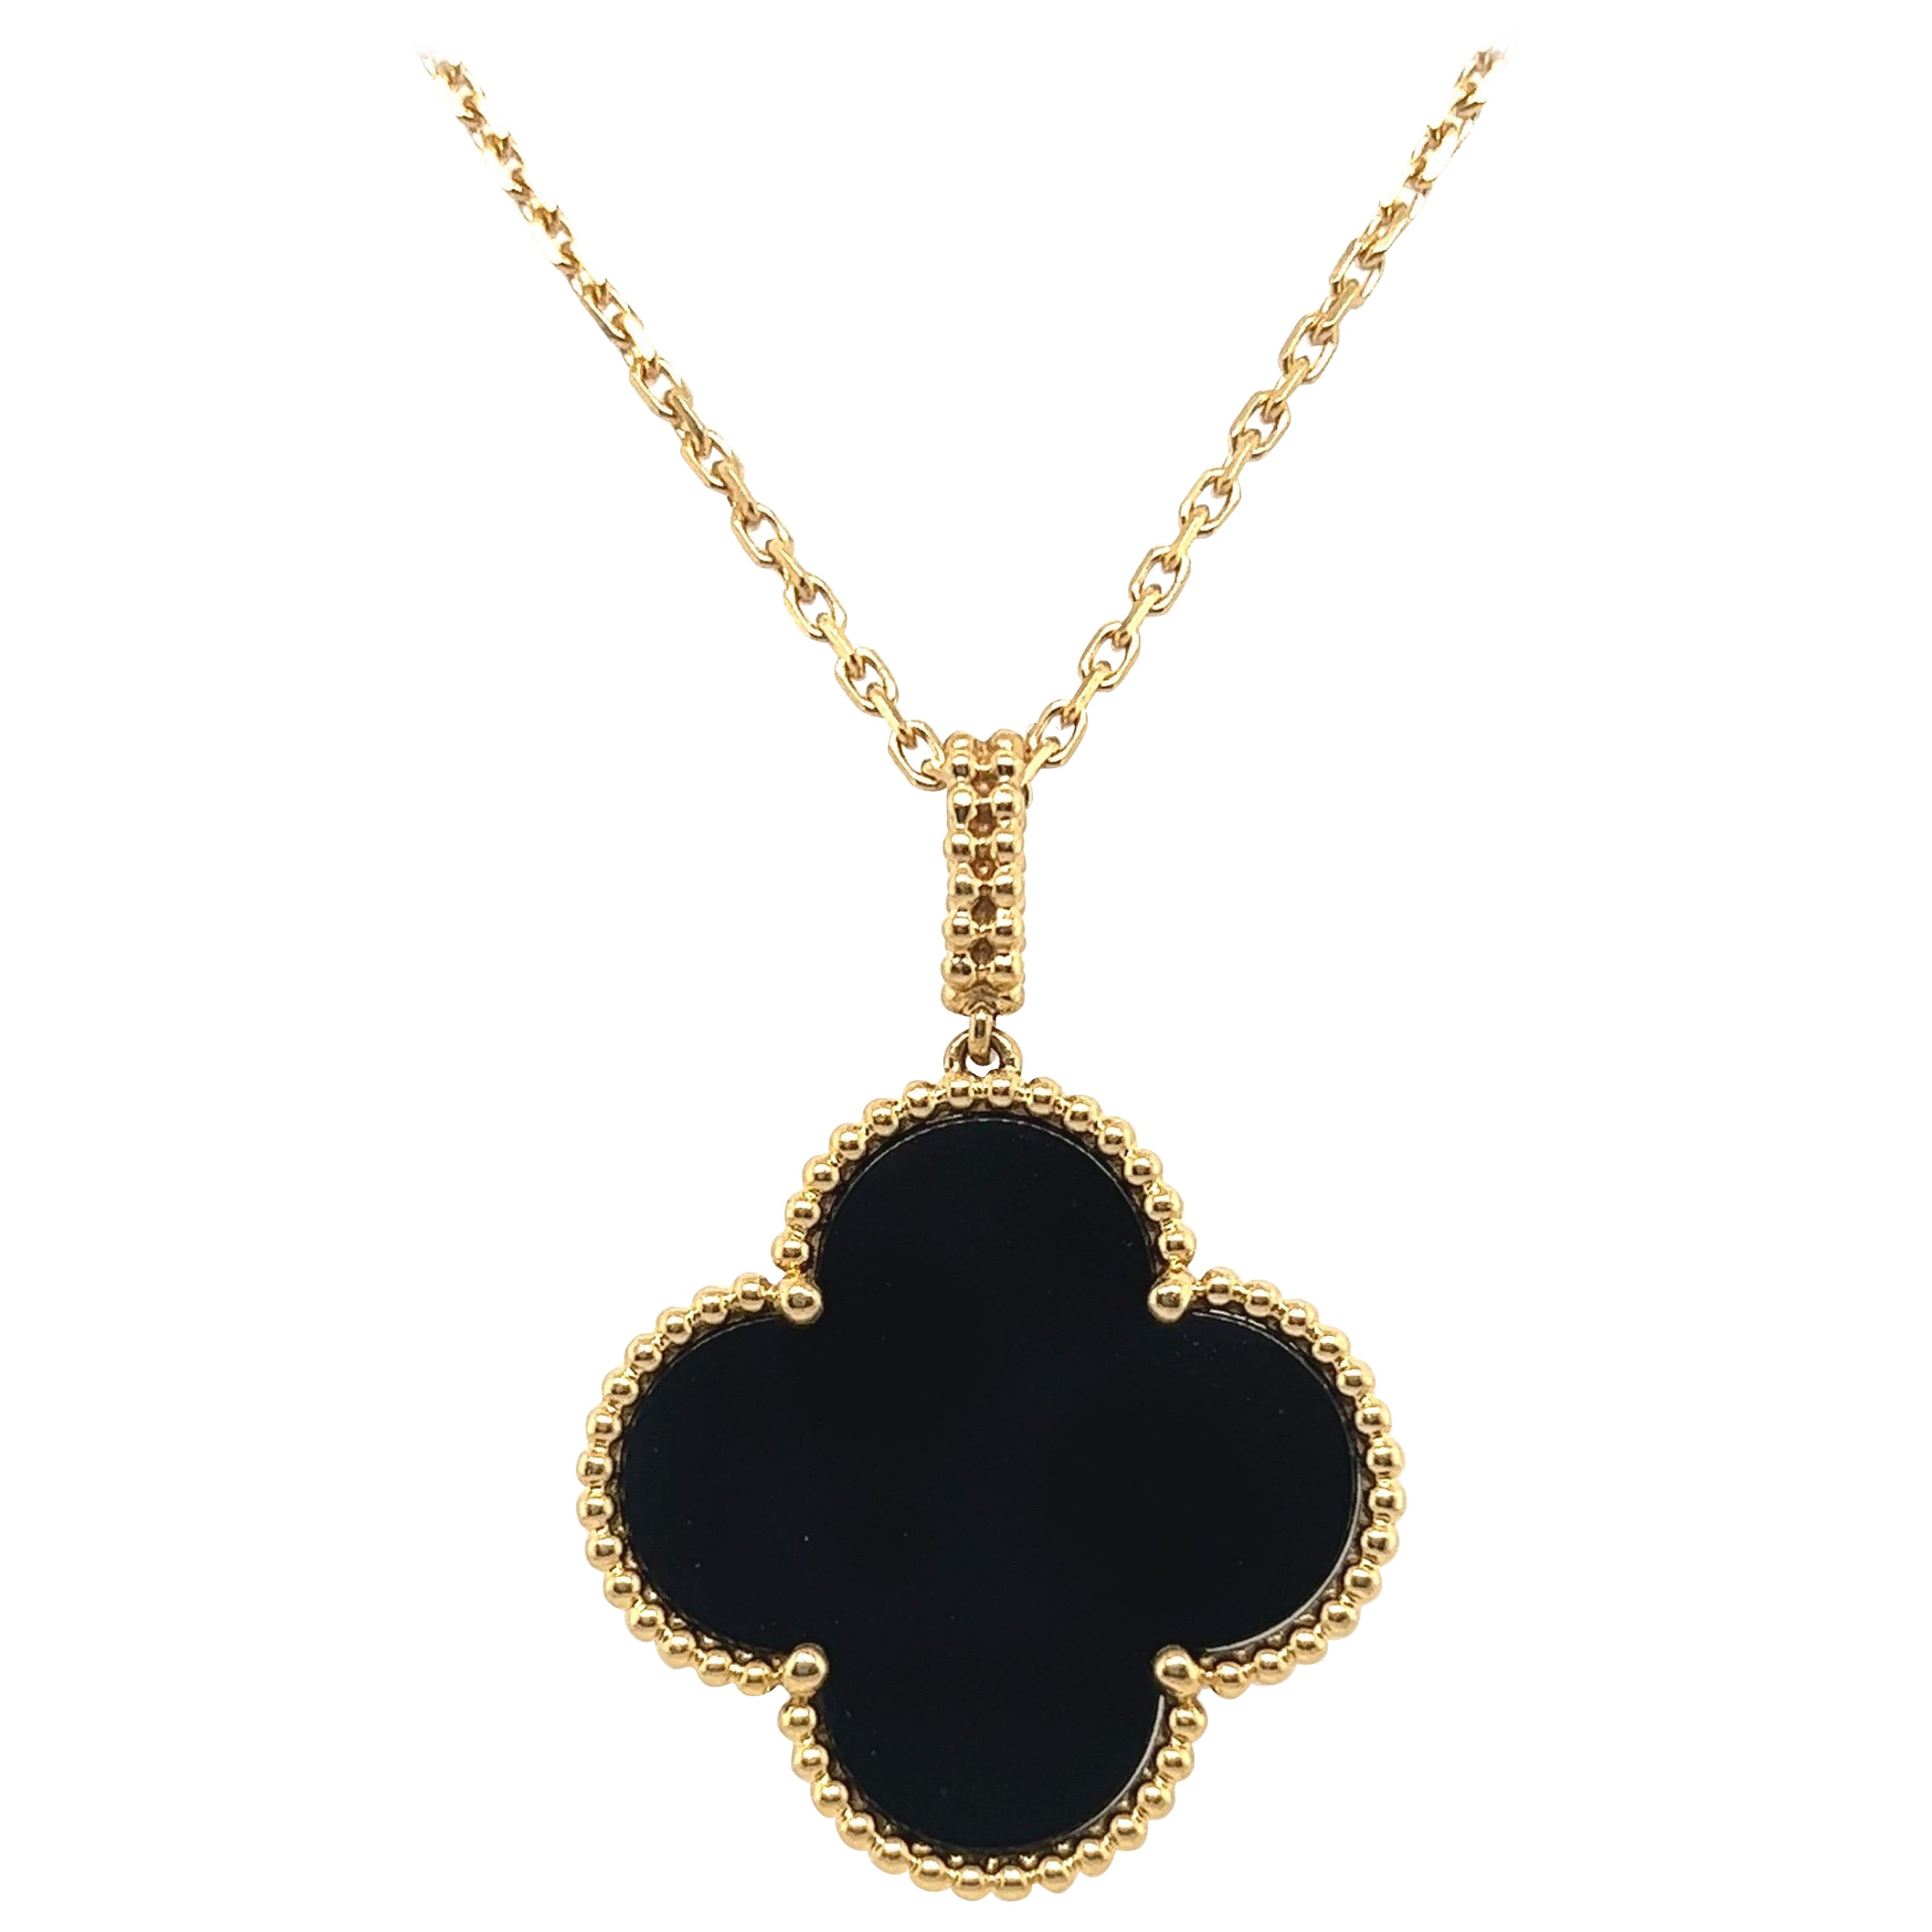 18 Karat Yellow Gold and Onyx Alhambra Pendant with Chain by Van Cleef & Arpels